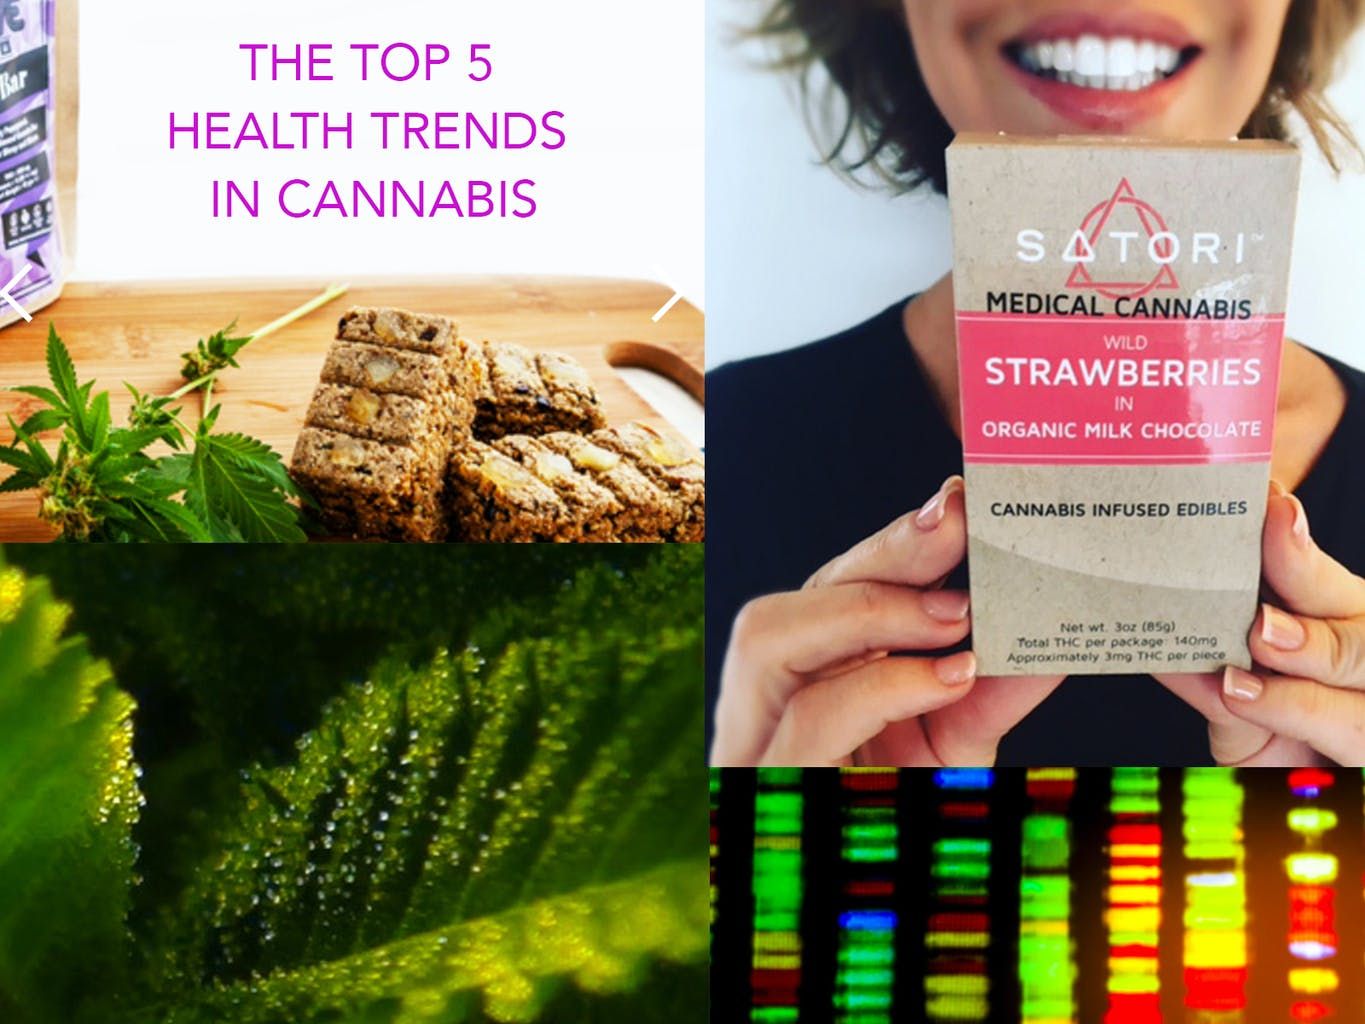 the_top_5_health_trends_in_cannabis_28192ebde9